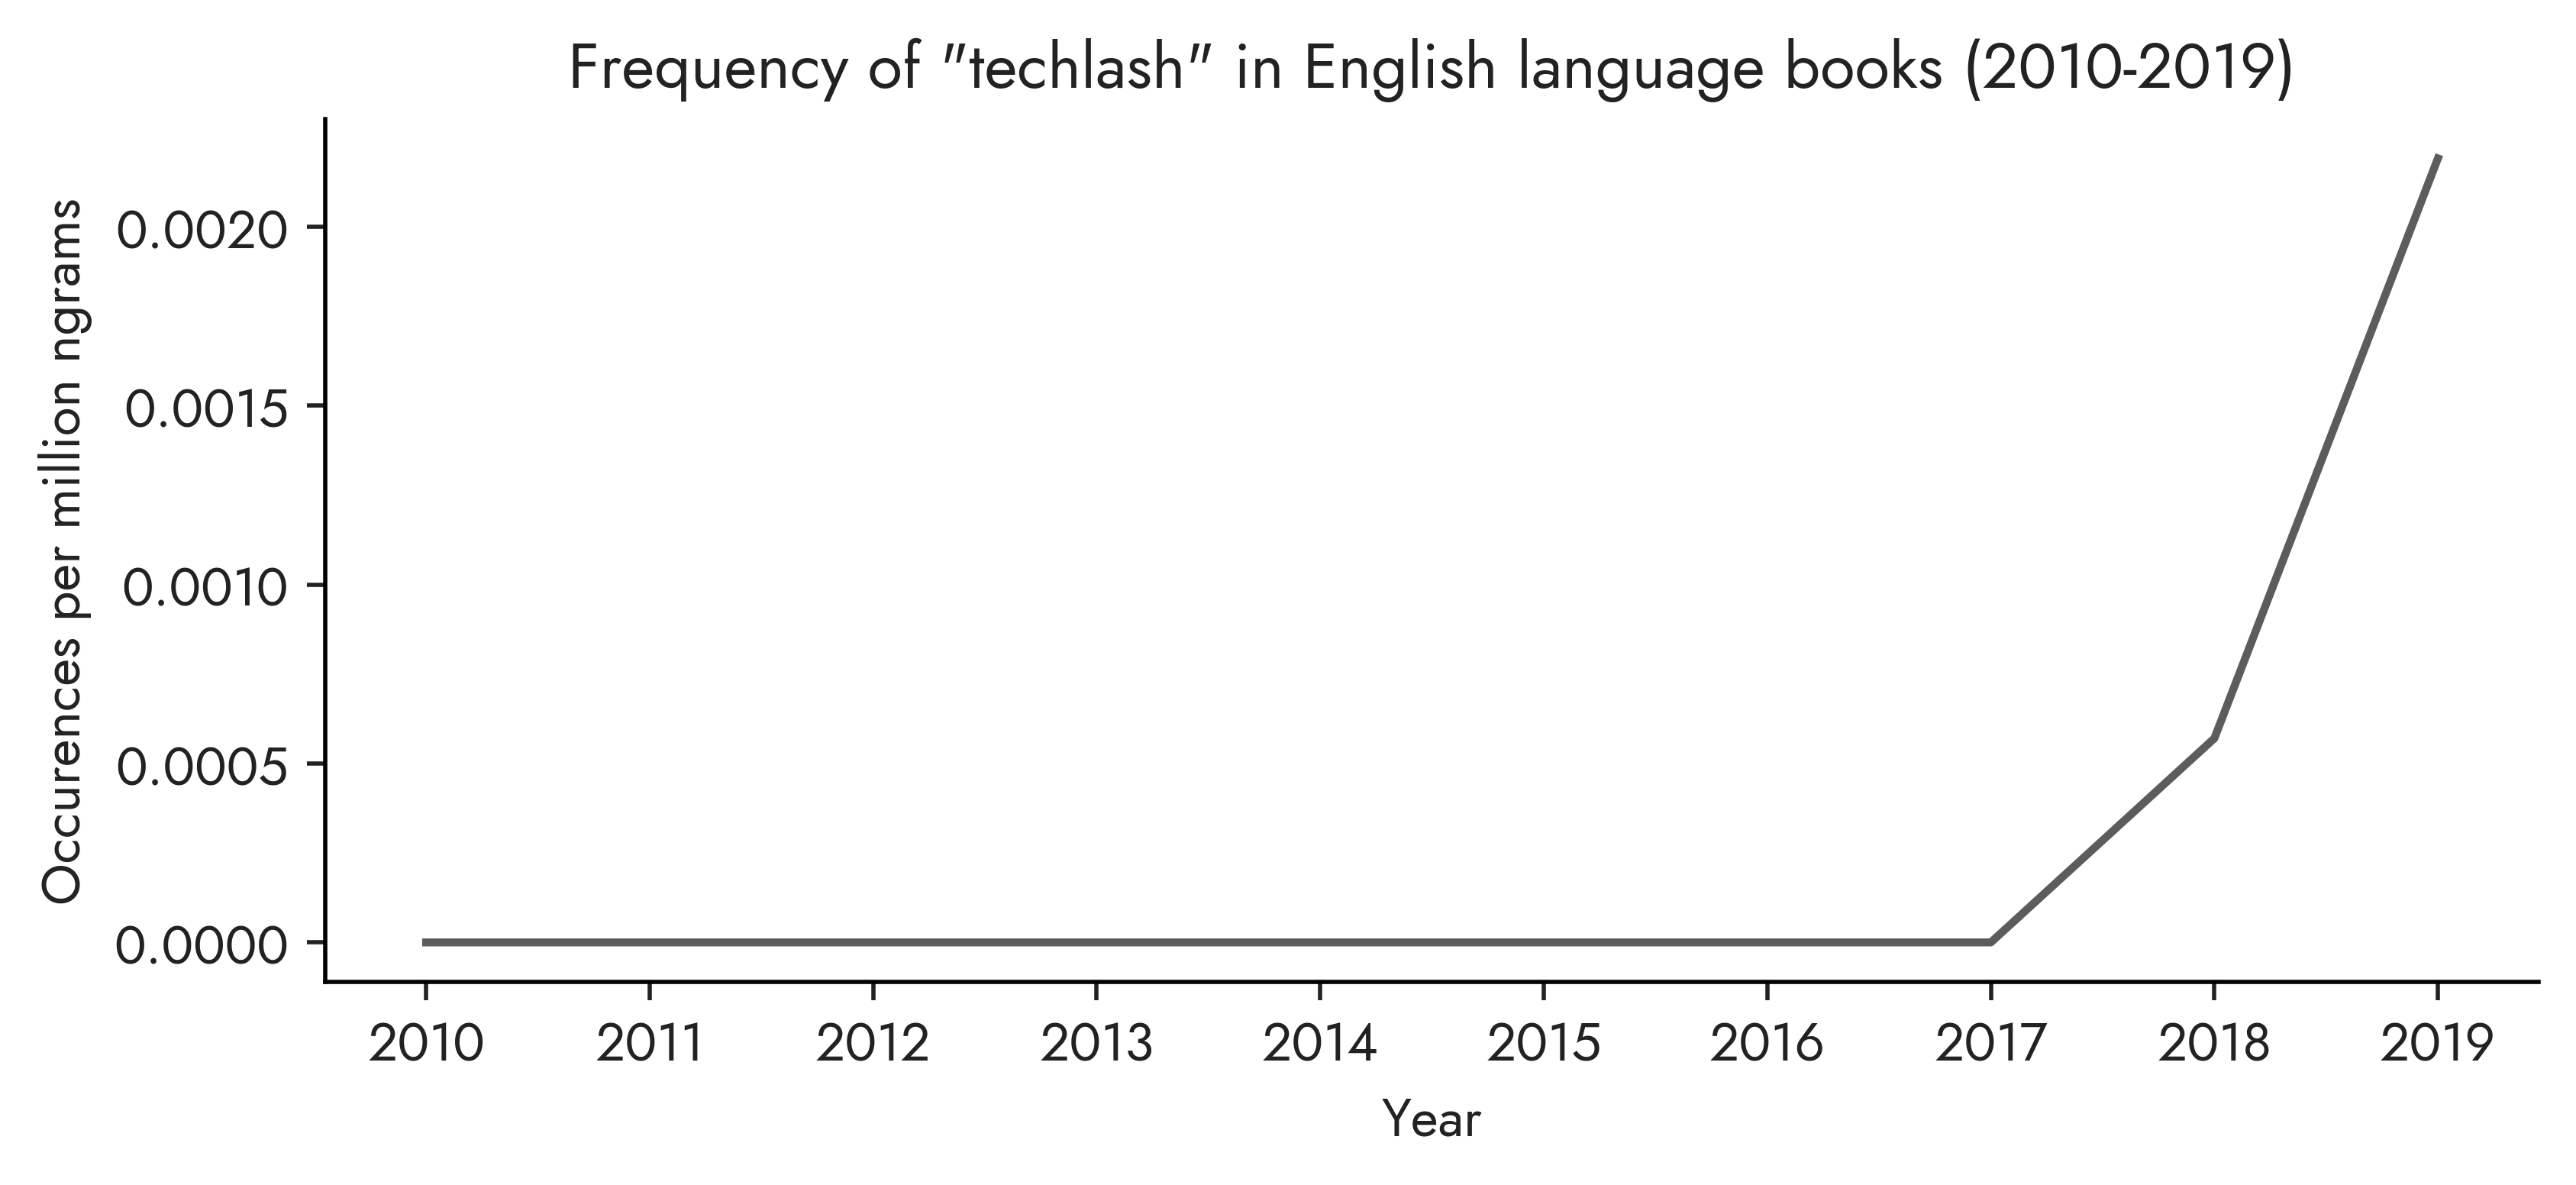 Figure showing take off in discussion of the "techlash" following 2017 in English books.